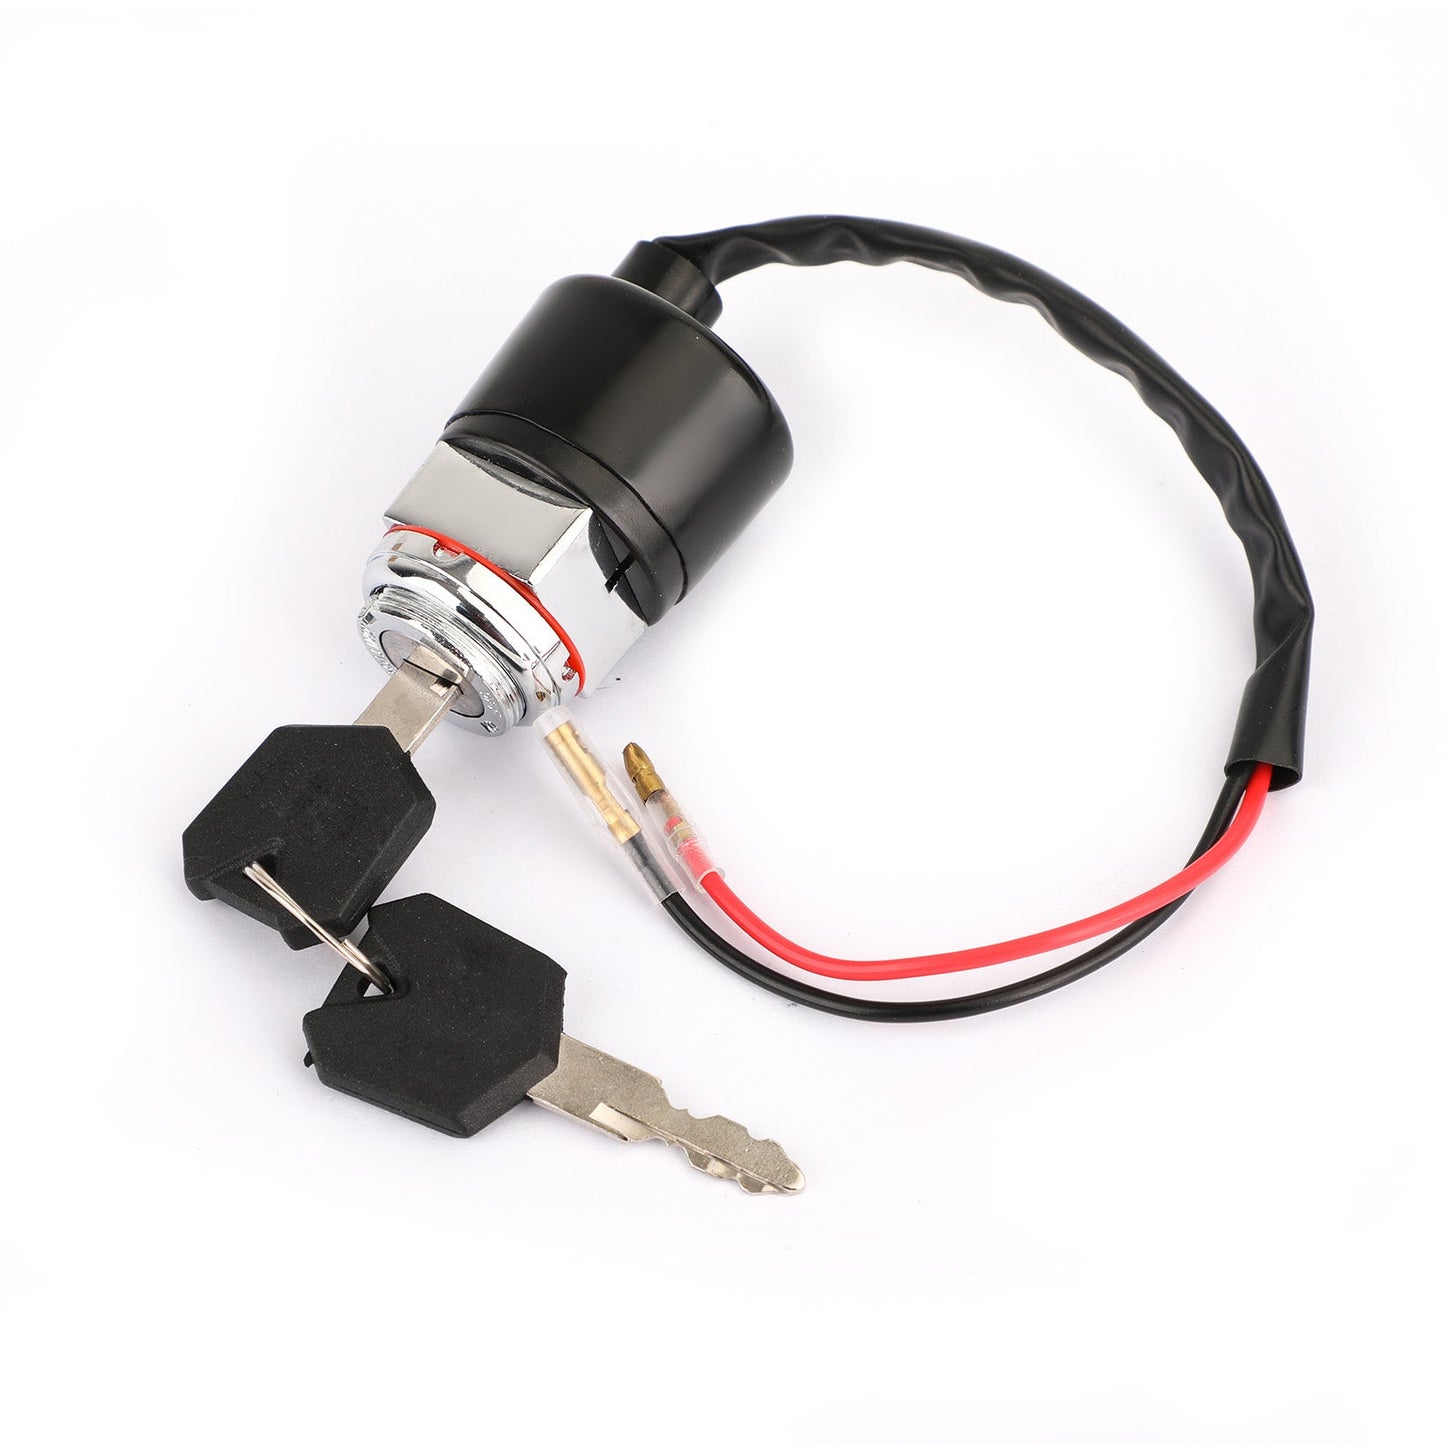 Ignition Switch Lock with 2 Keys Kit Fit For Honda CB125S SL TL 125 CL125 S CB100 XL100 CL100 SL100 CL70